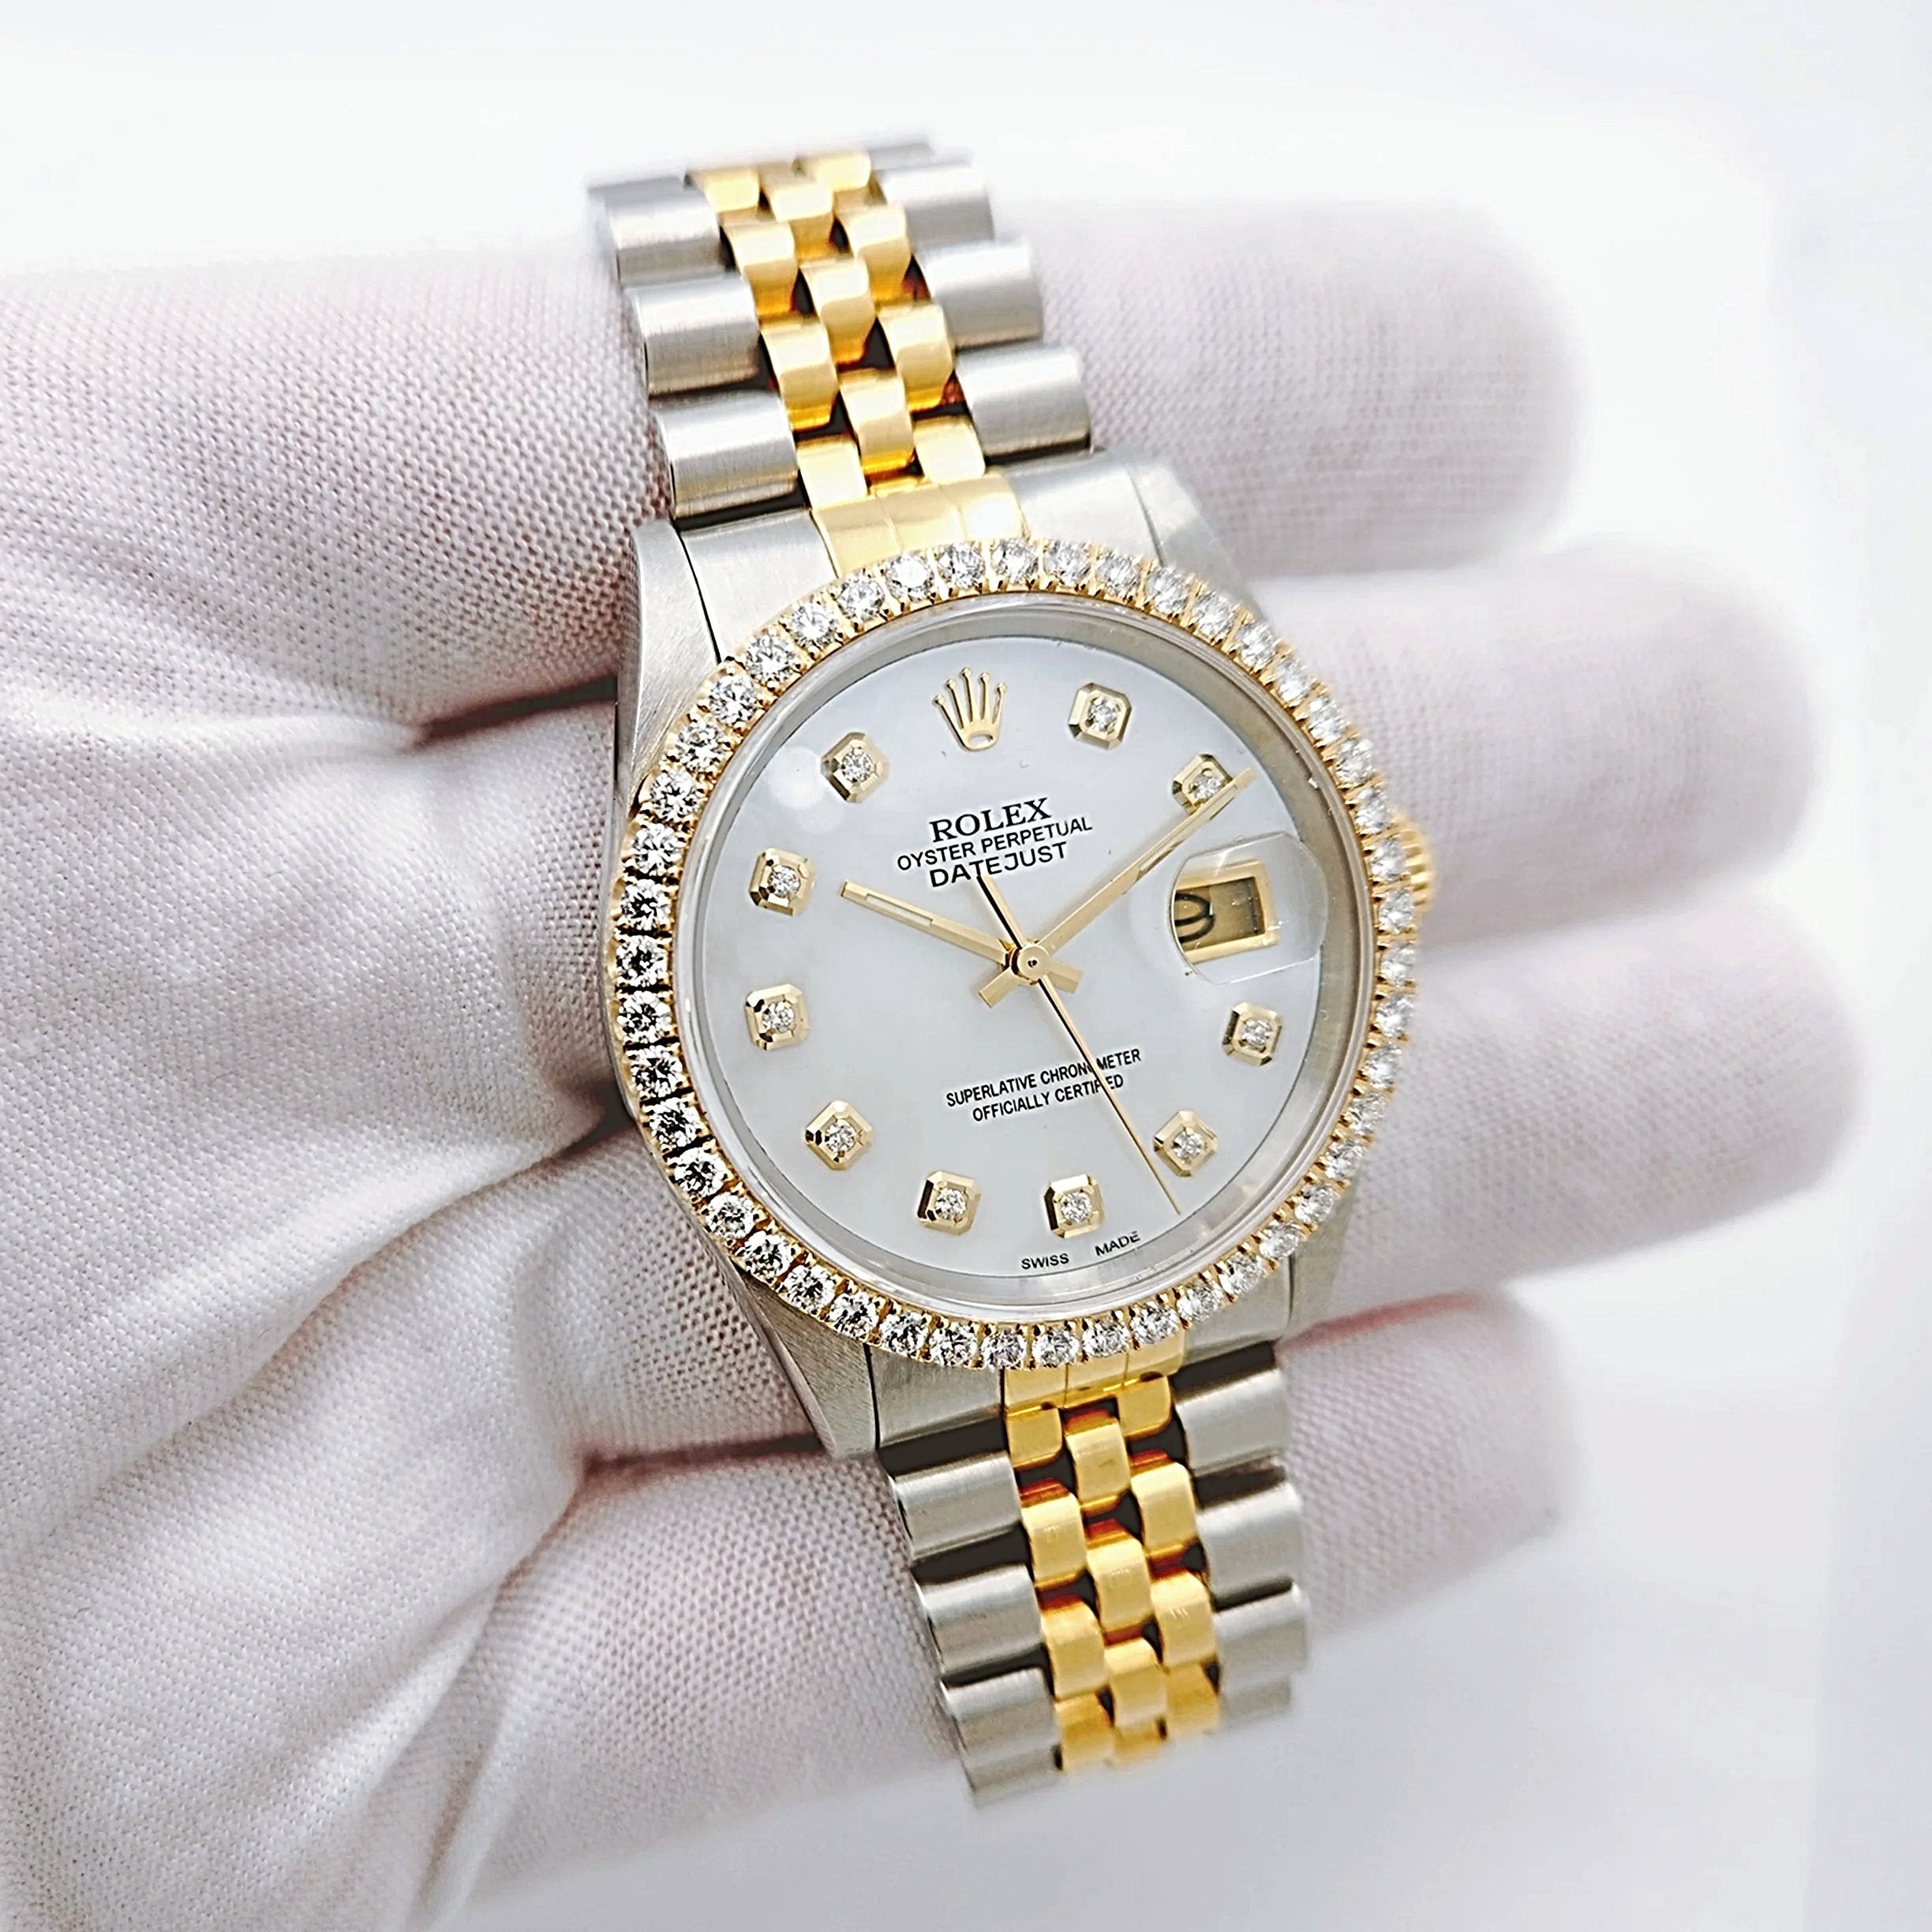 Men's Rolex 36mm DateJust 18K Gold / Stainless Steel Two Tone Watch with Mother of Pearl Diamond Dial and Diamond Bezel. (Pre-Owned 16233)